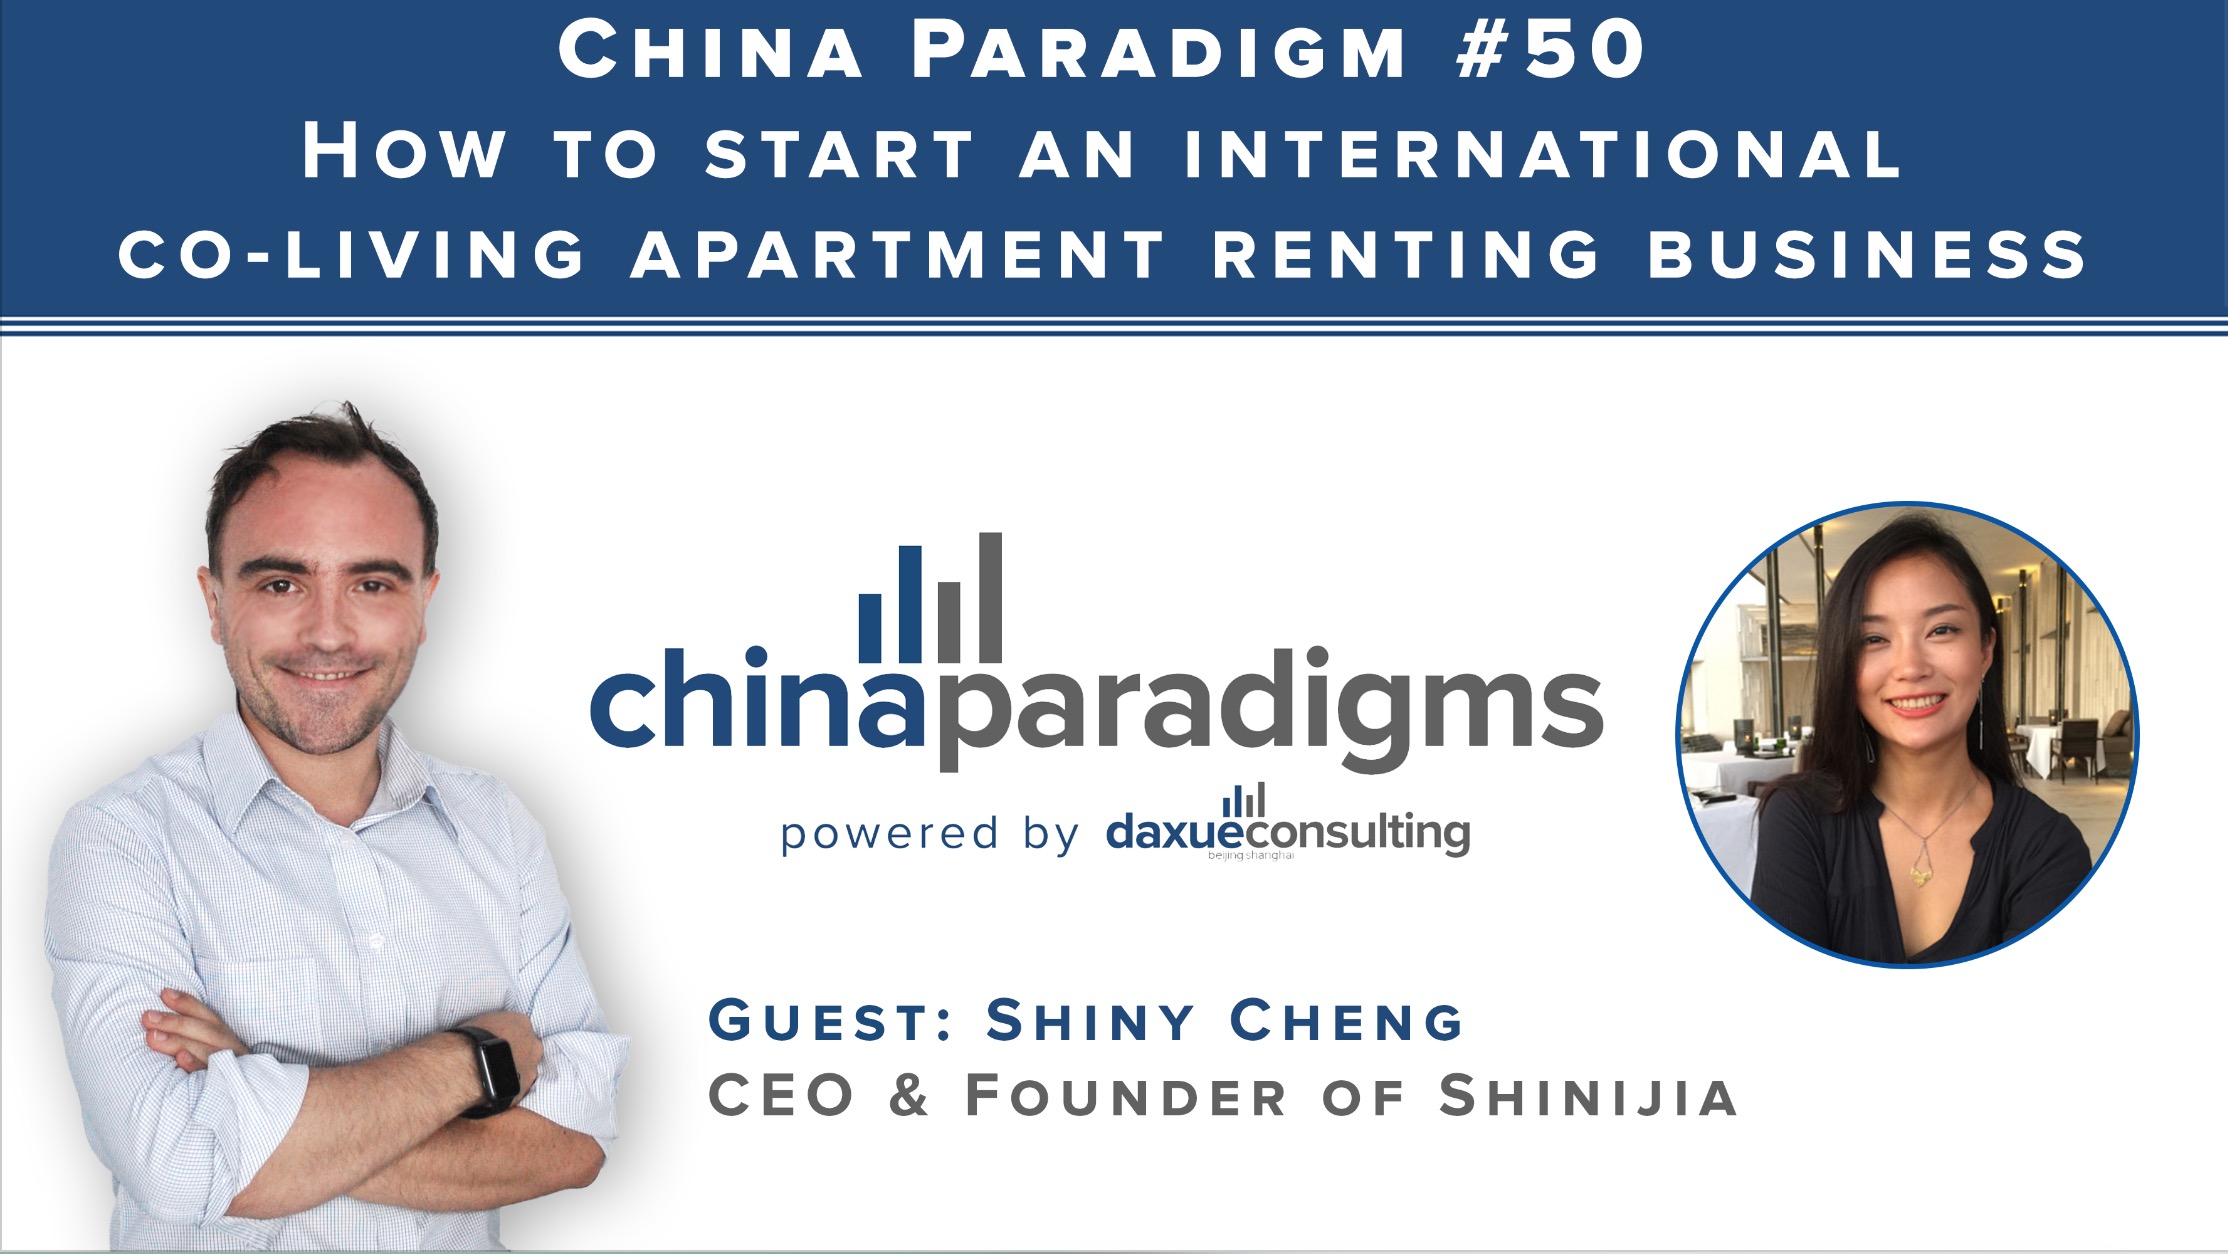 China Paradigm 50: How to start an international co-living apartment renting business in China